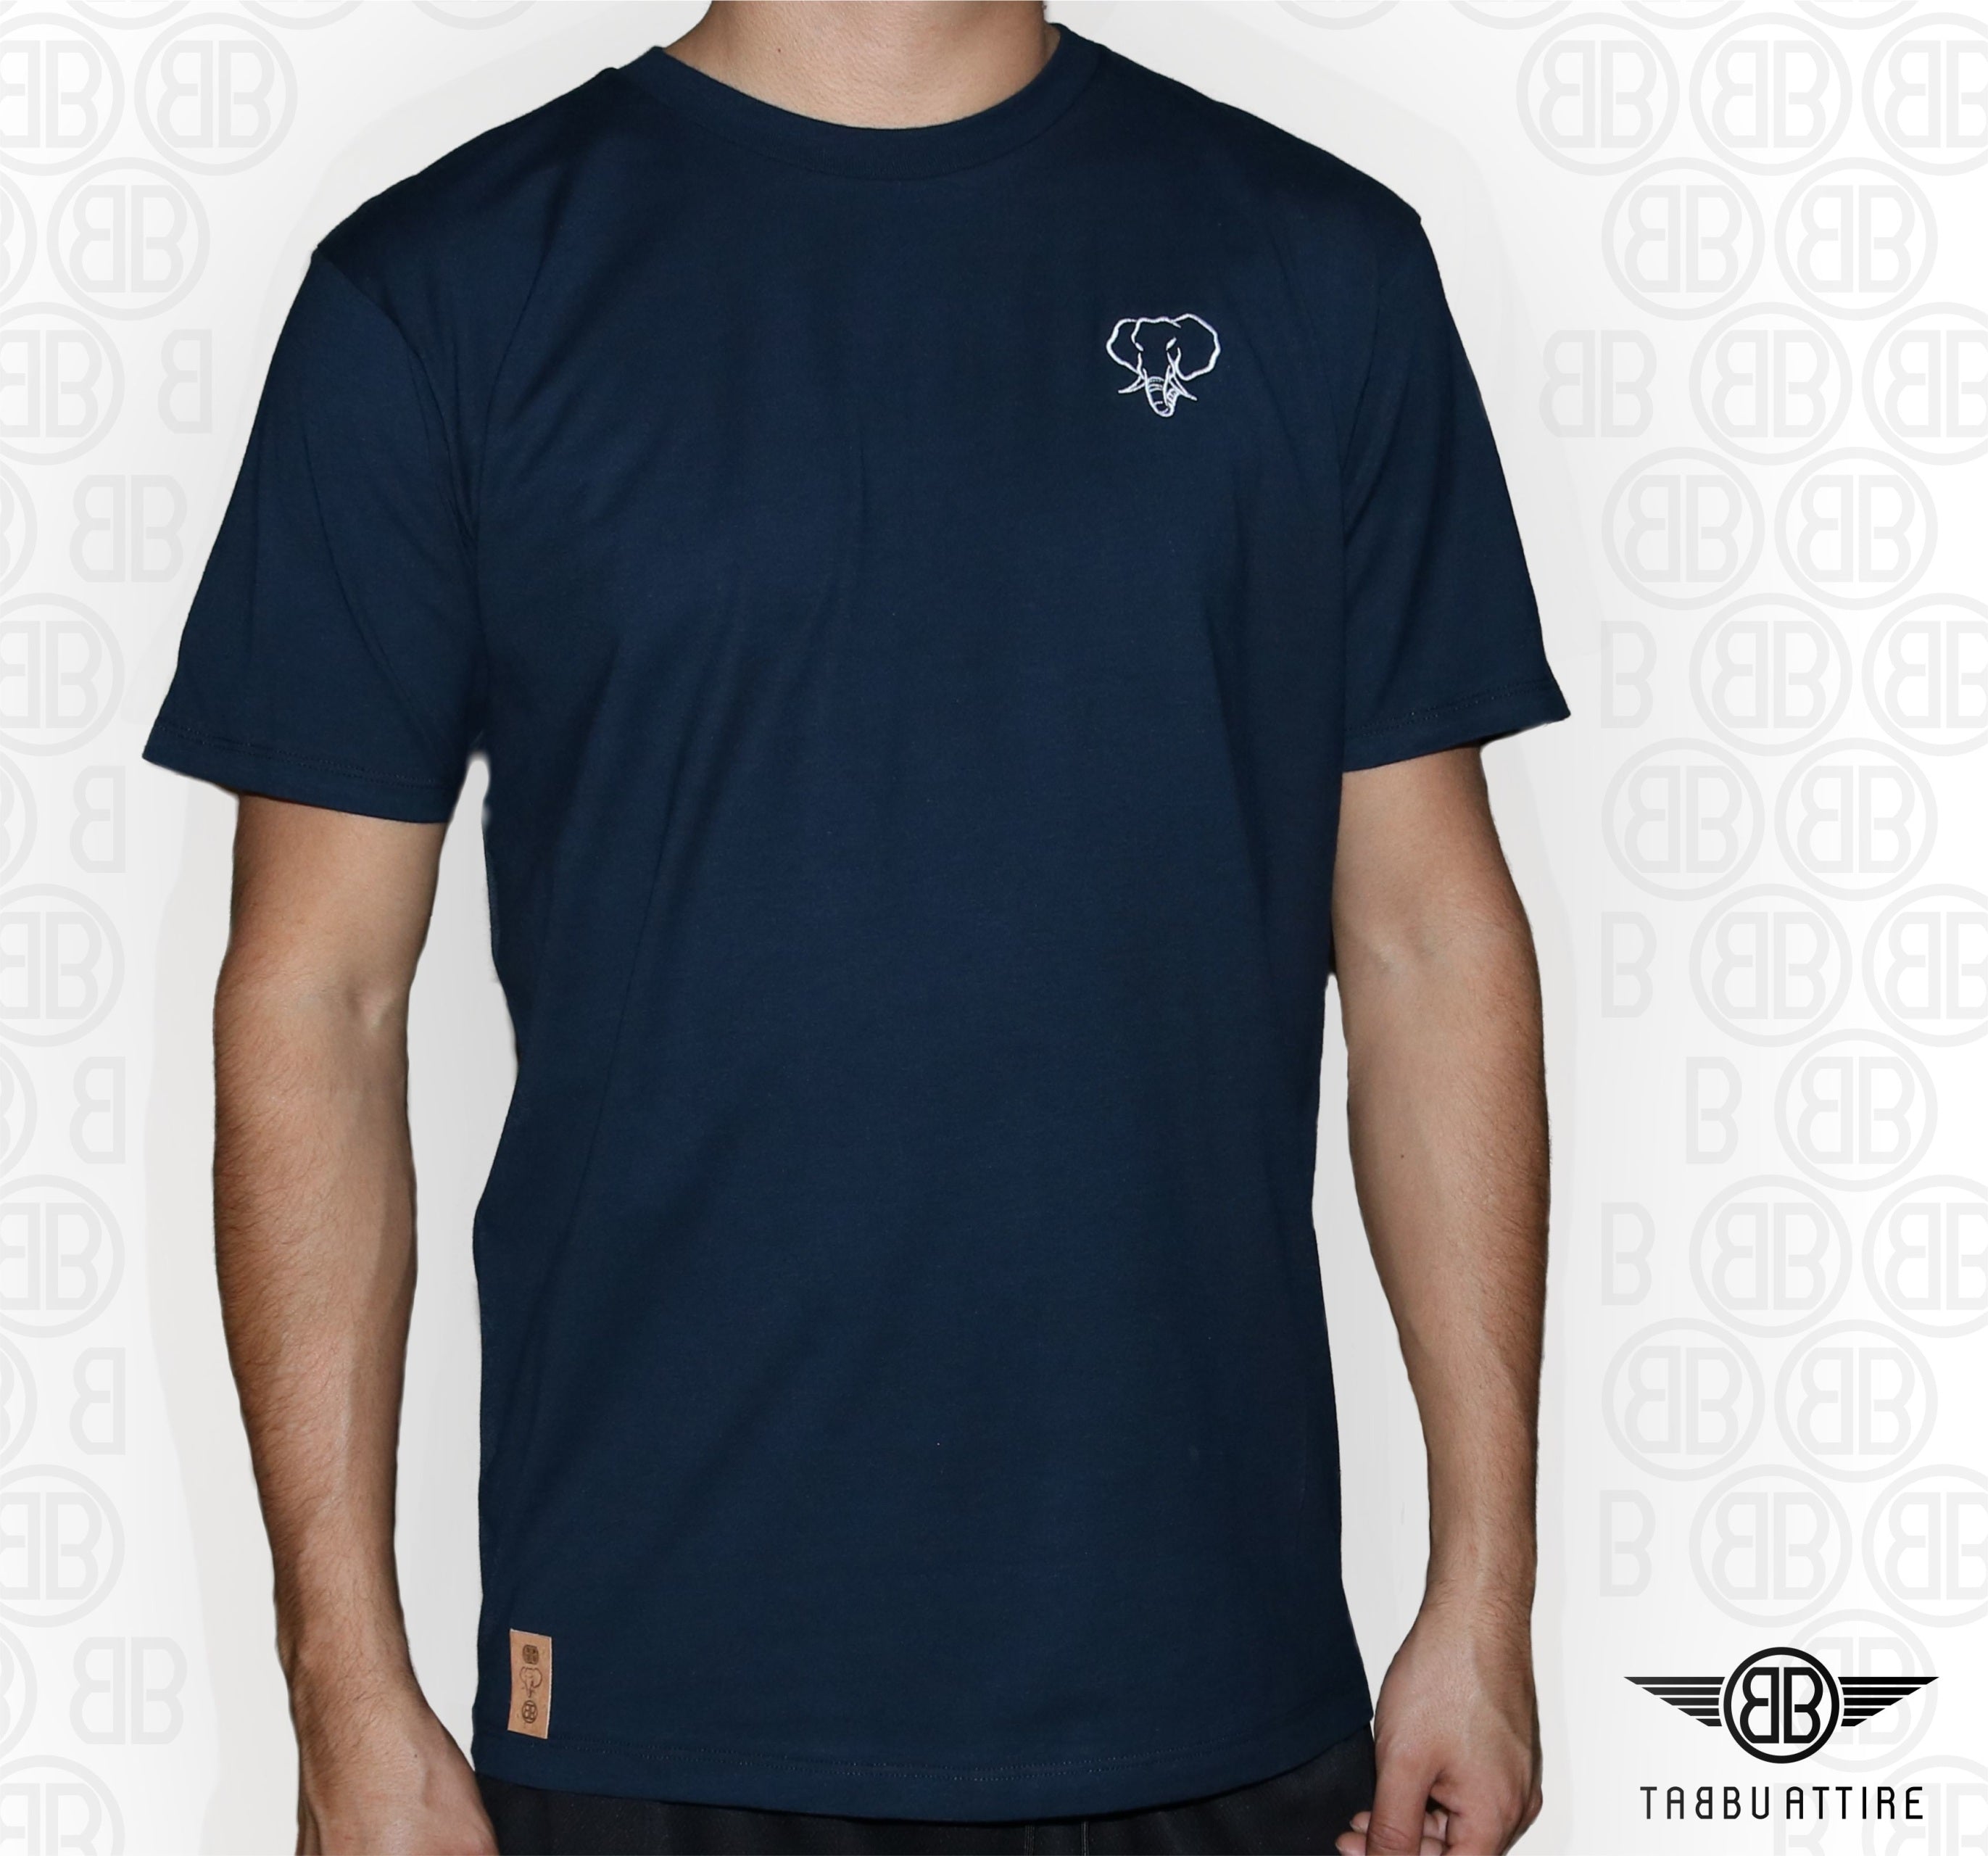 Elephant Head Crewneck Tee in Navy with White Embroidery